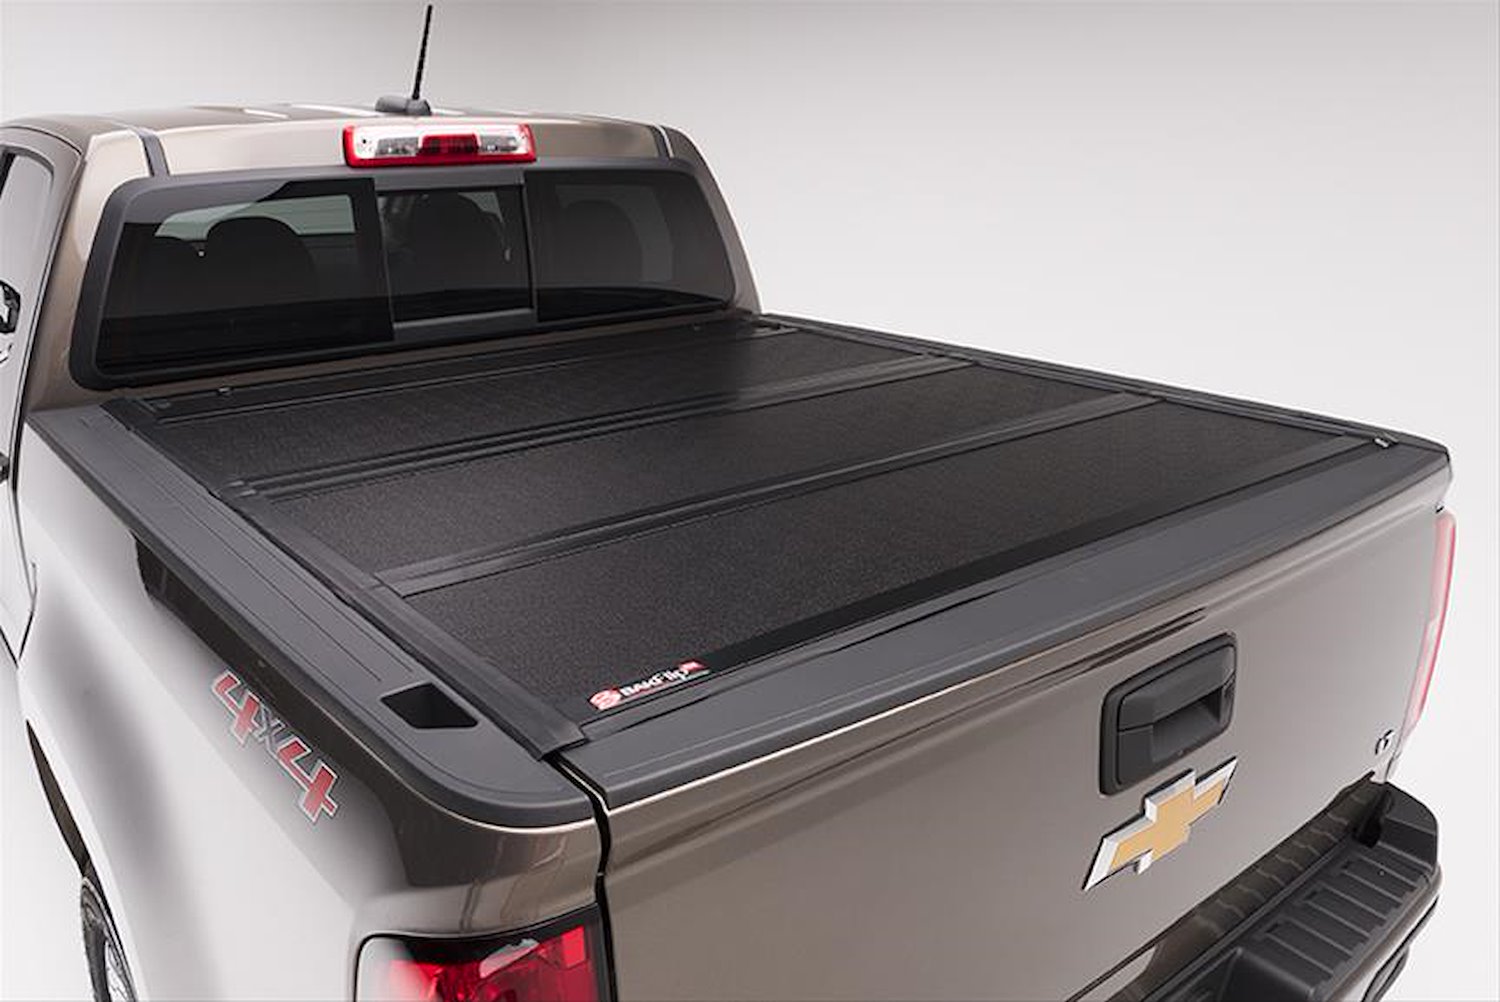 226122 BAKFlip G2 for 15-18 GM Silverado/Sierra/2019 Legacy/Limited 8.2 ft. Bed, Hard Folding Cover Style [Black Finish]